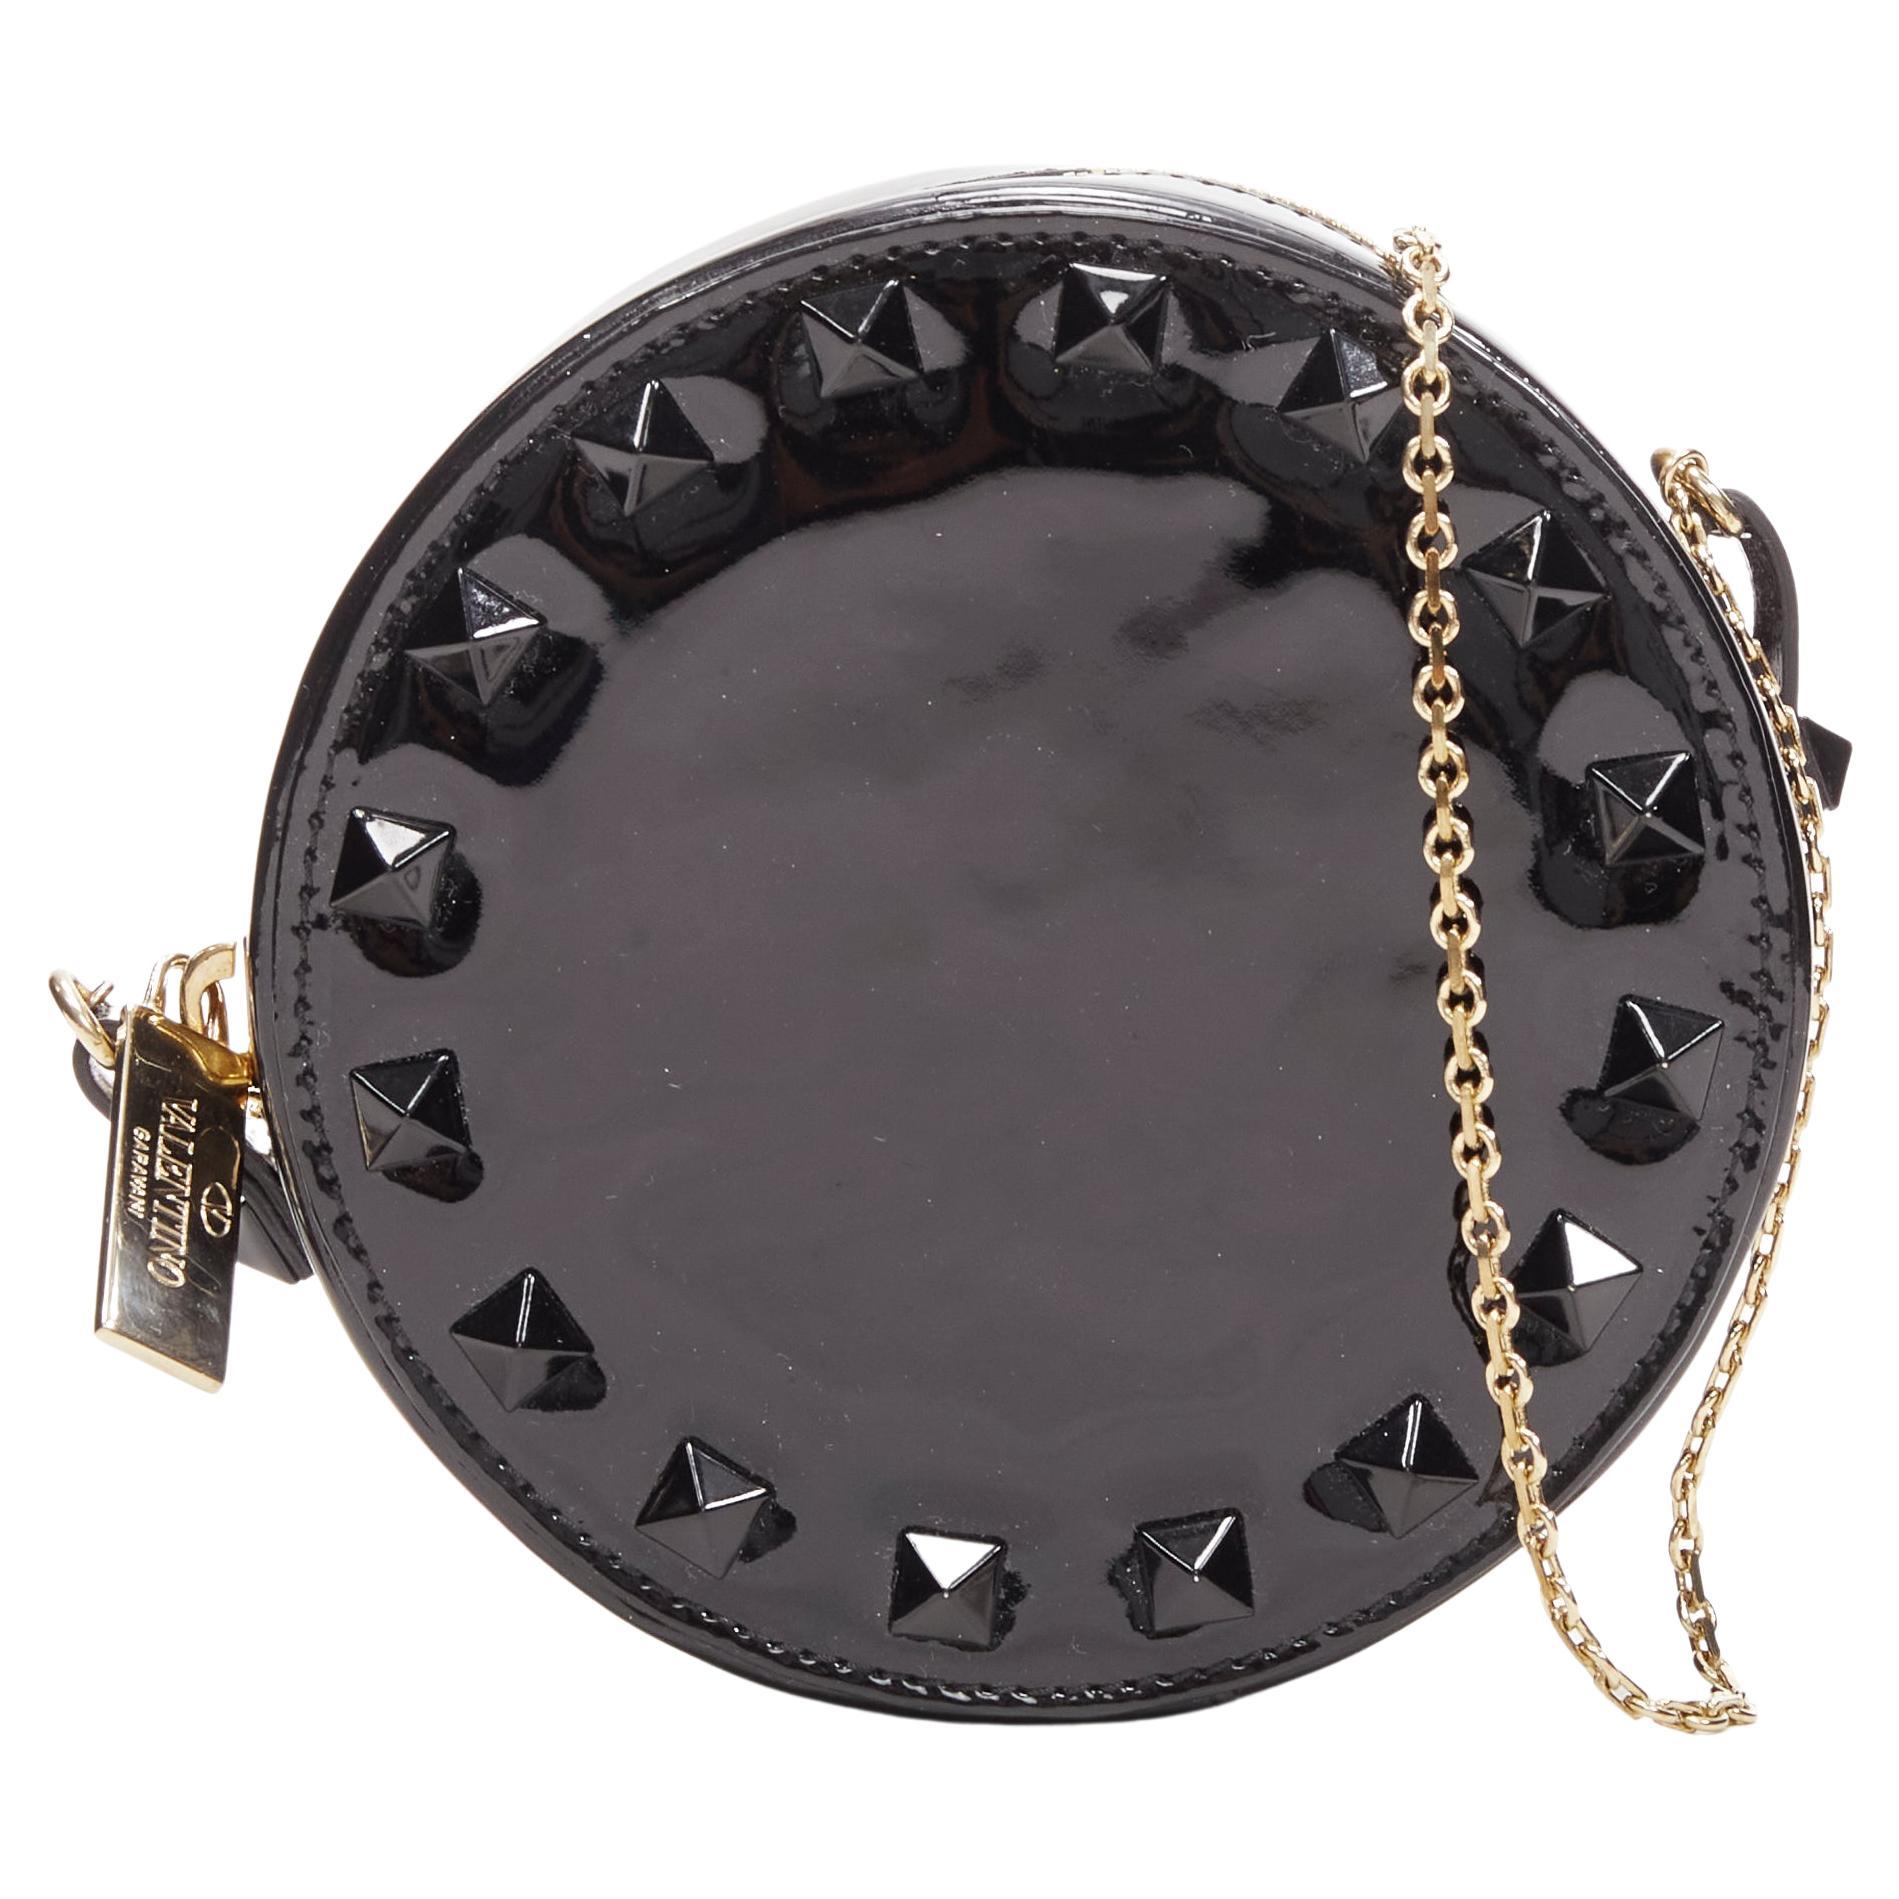 VALENTIN Rockstud black patent leather studded gold chain circle crossbody bag For Sale